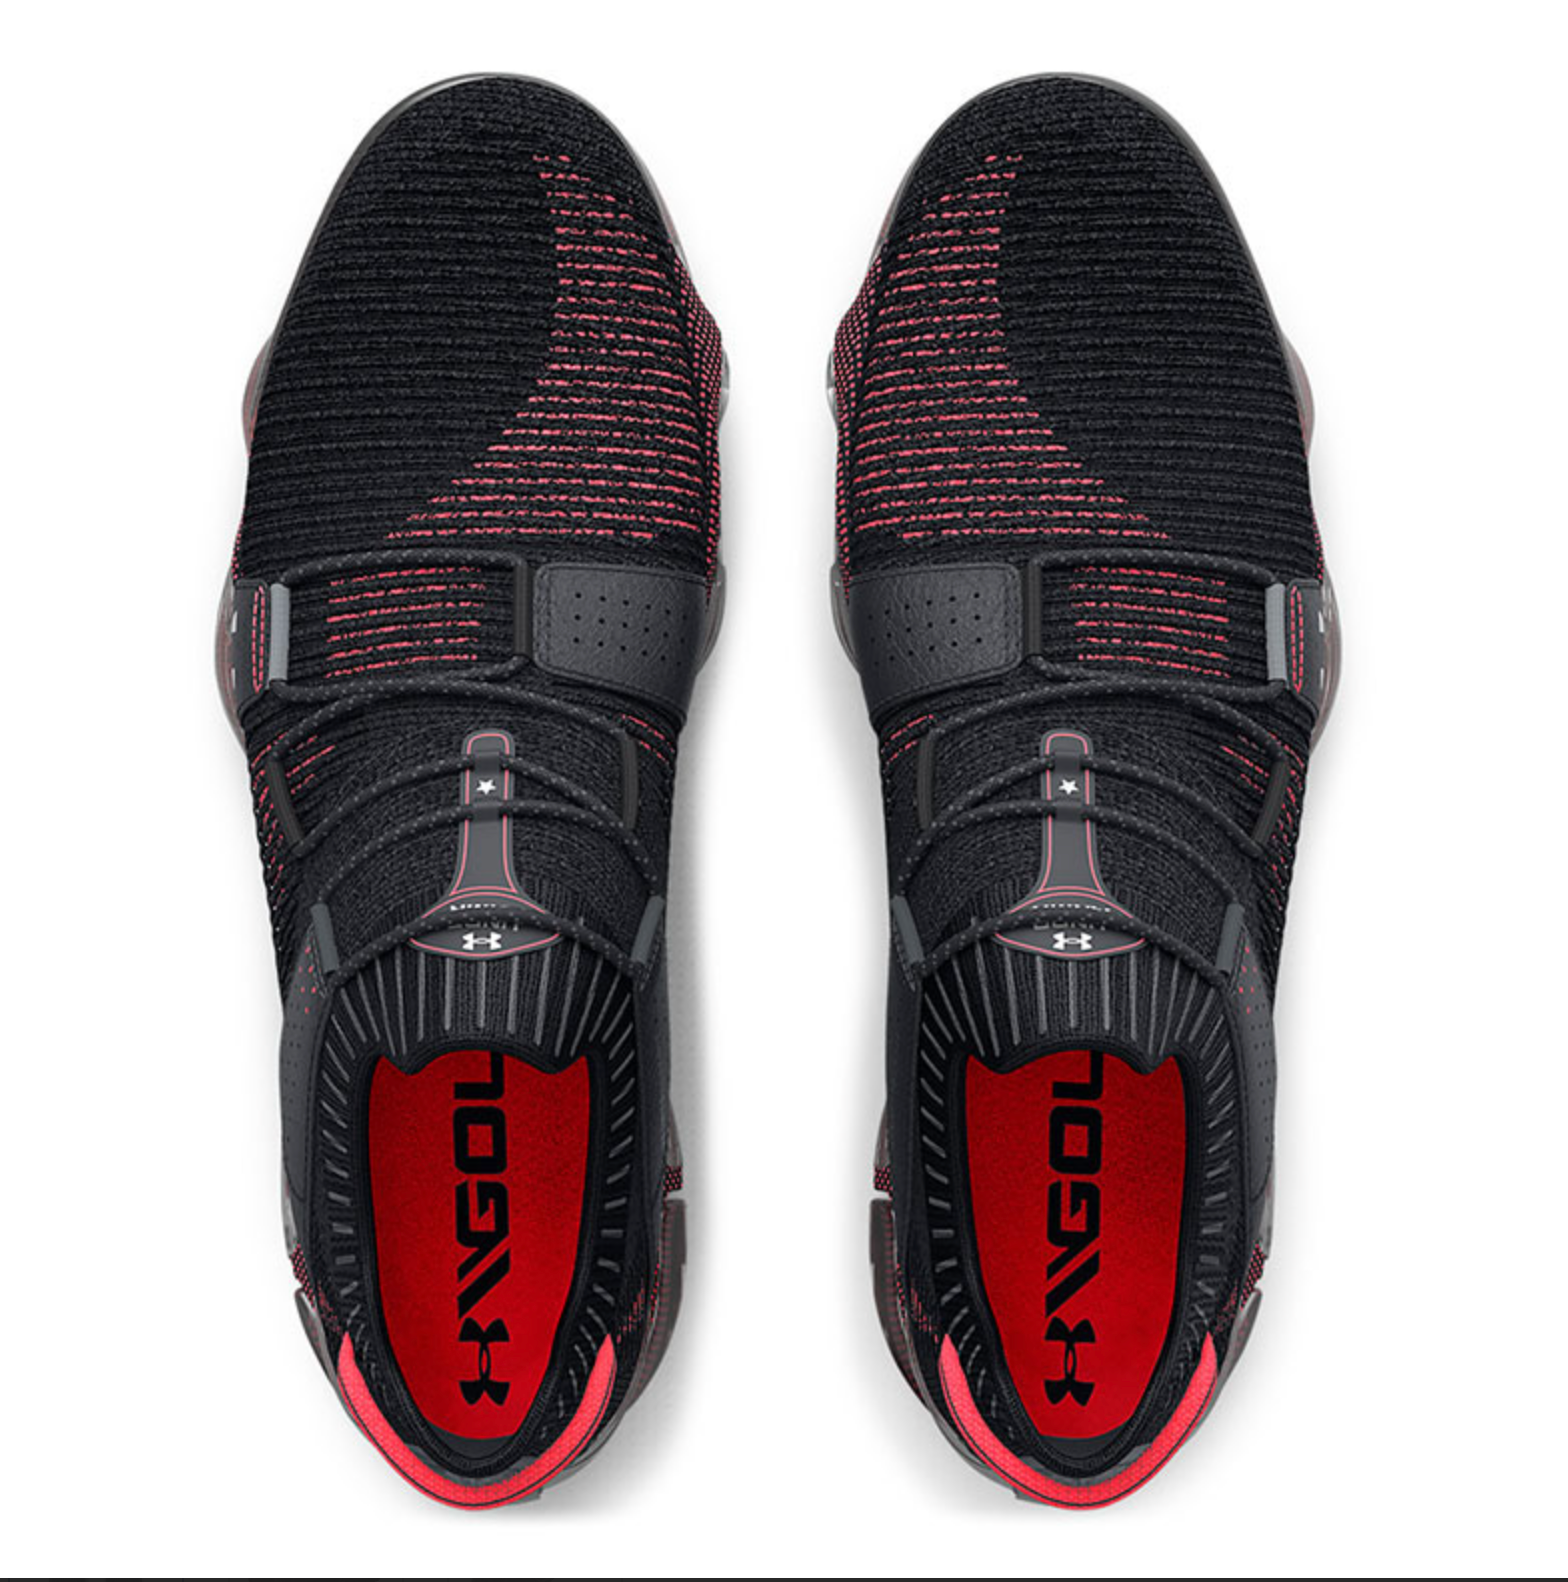 UNDER ARMOUR HOVR TOUR SL SHOES - BLACK & RED